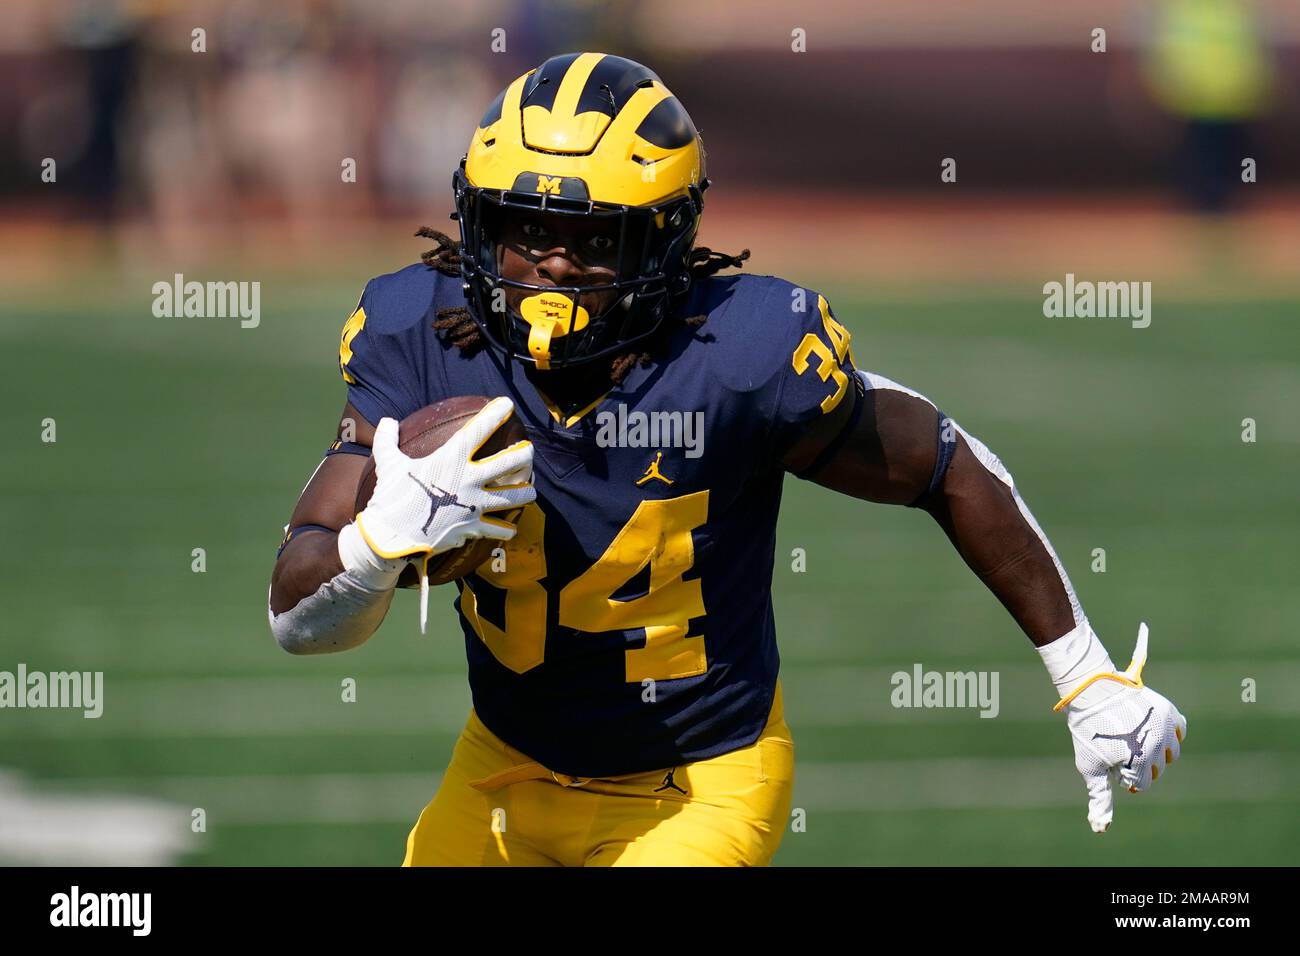 Michigan running back Leon Franklin (34) runs for a 20-yard touchdown  reception in the second half of an NCAA college football game against  Connecticut in Ann Arbor, Mich., Saturday, Sept. 17, 2022. (